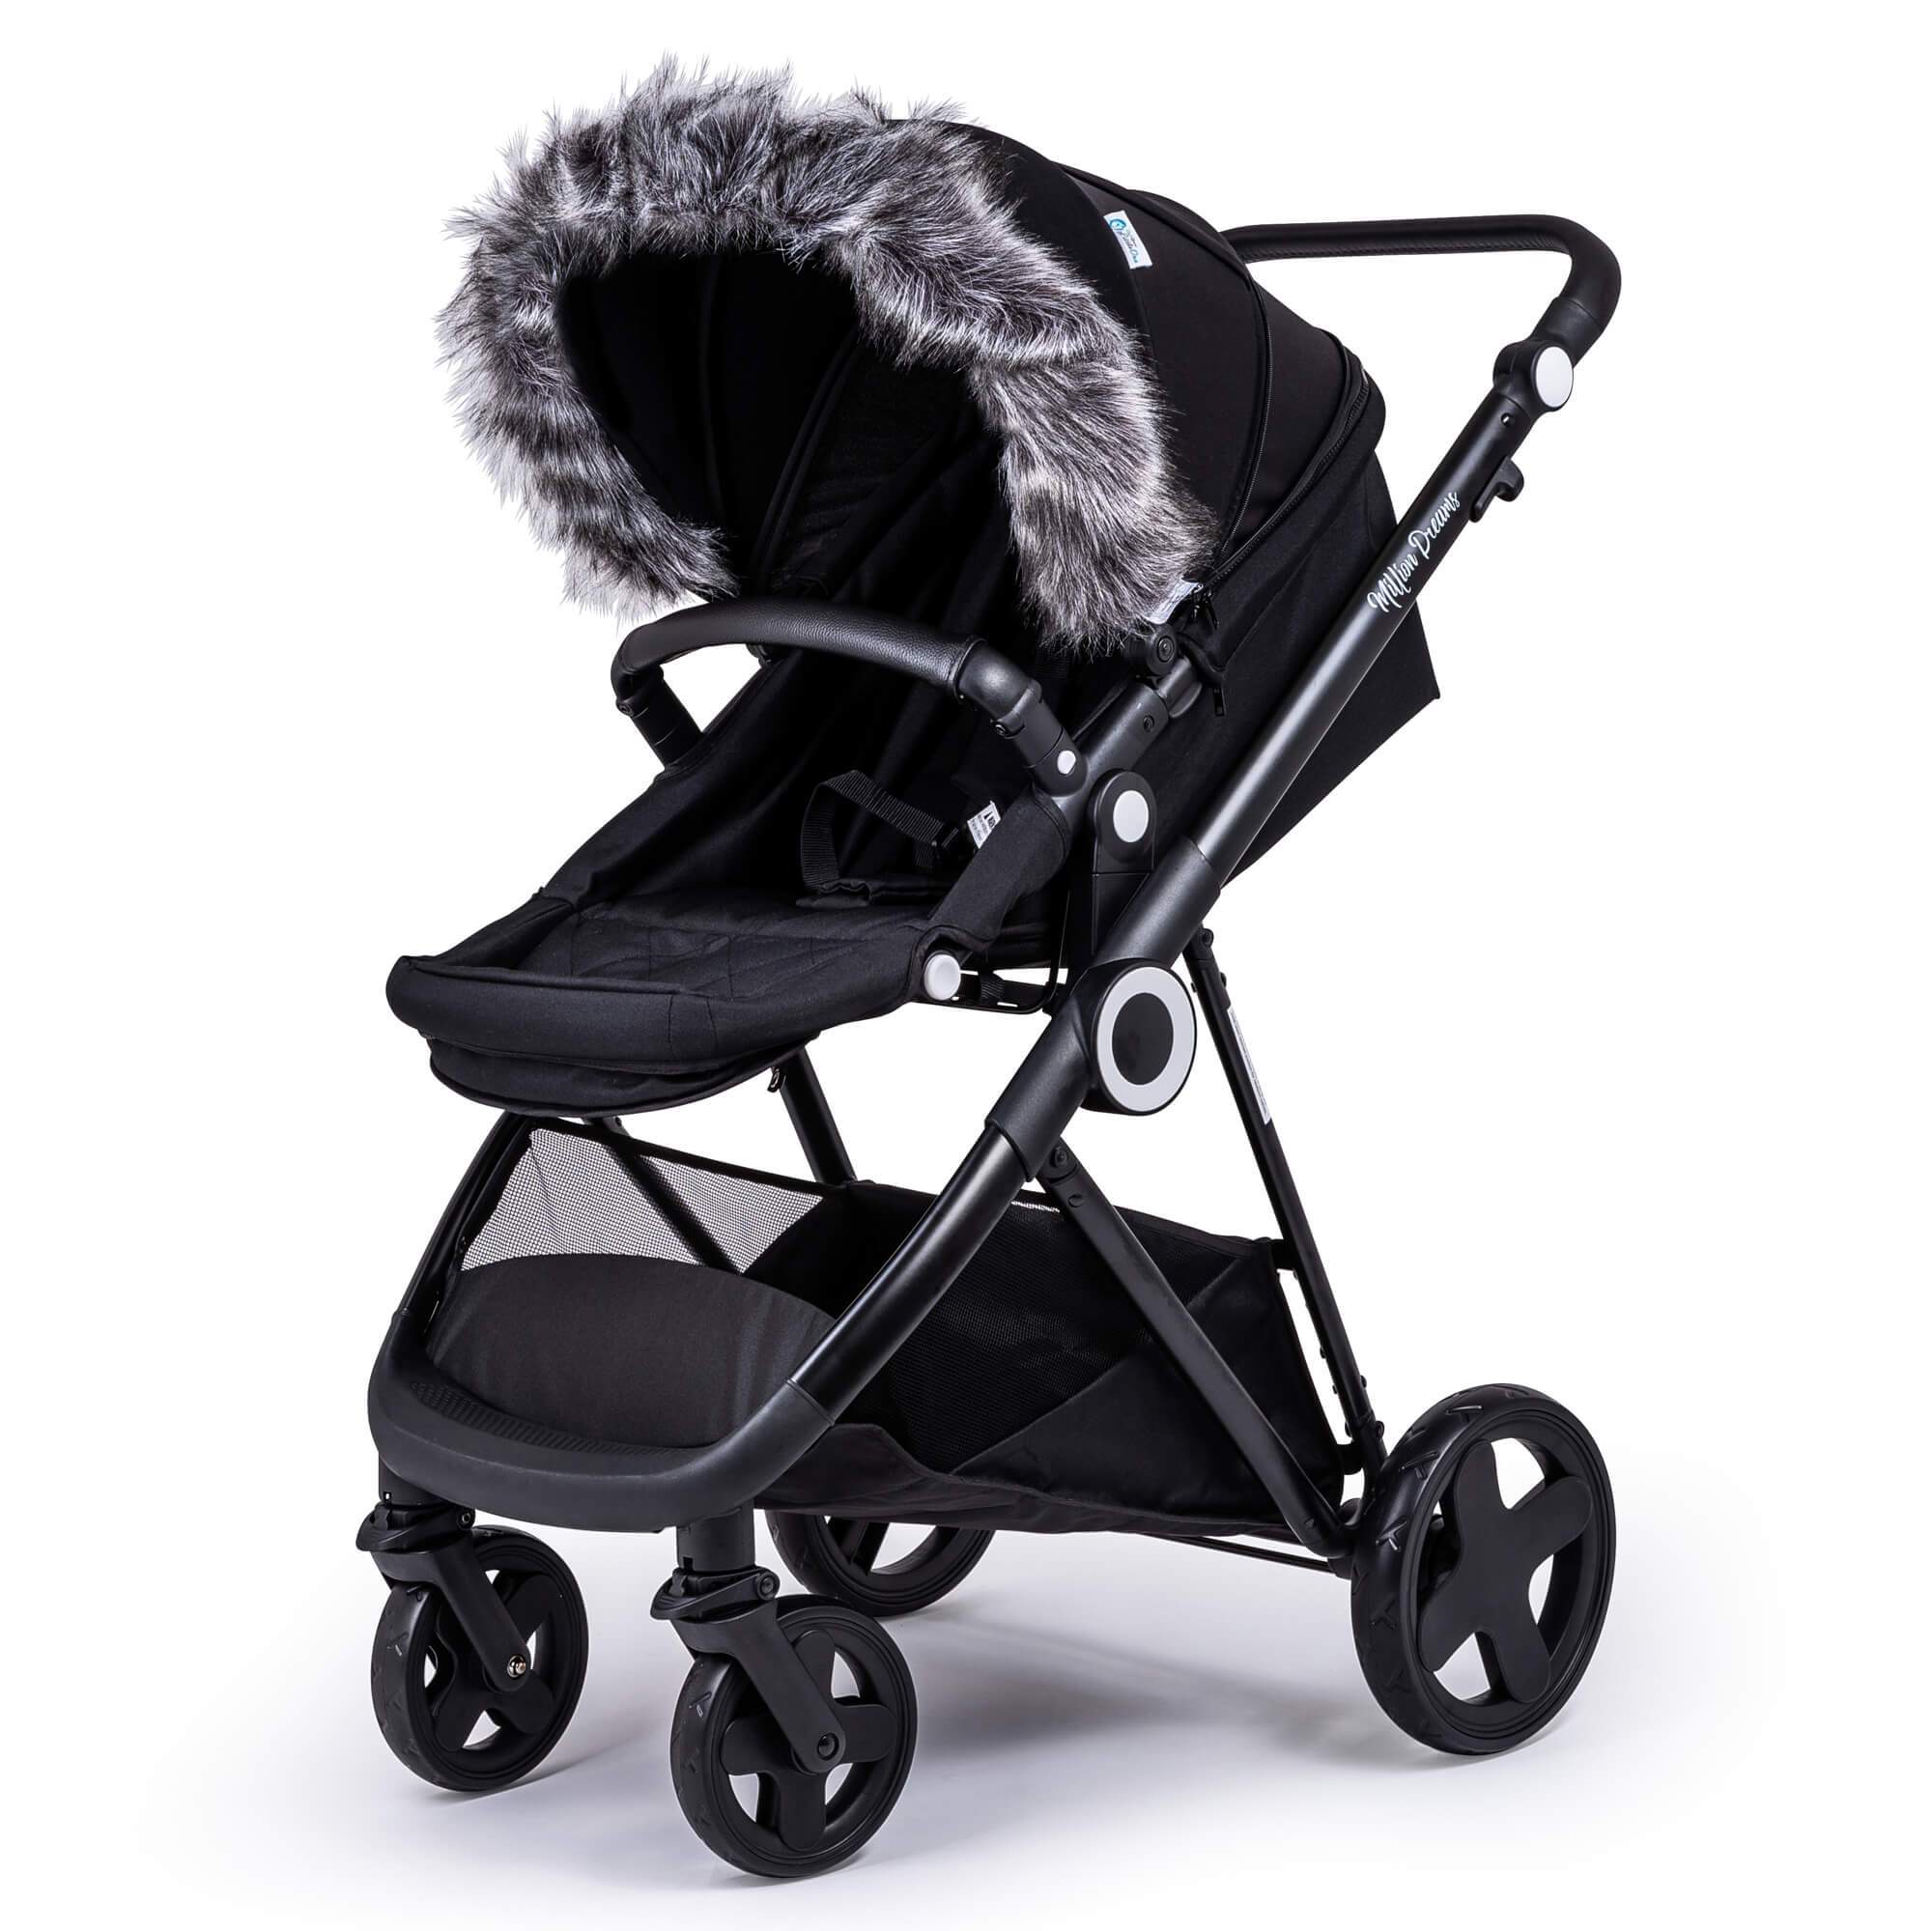 Pram Fur Hood Trim Attachment for Pushchair Compatible with Red Kite - Dark Grey / Fits All Models | For Your Little One